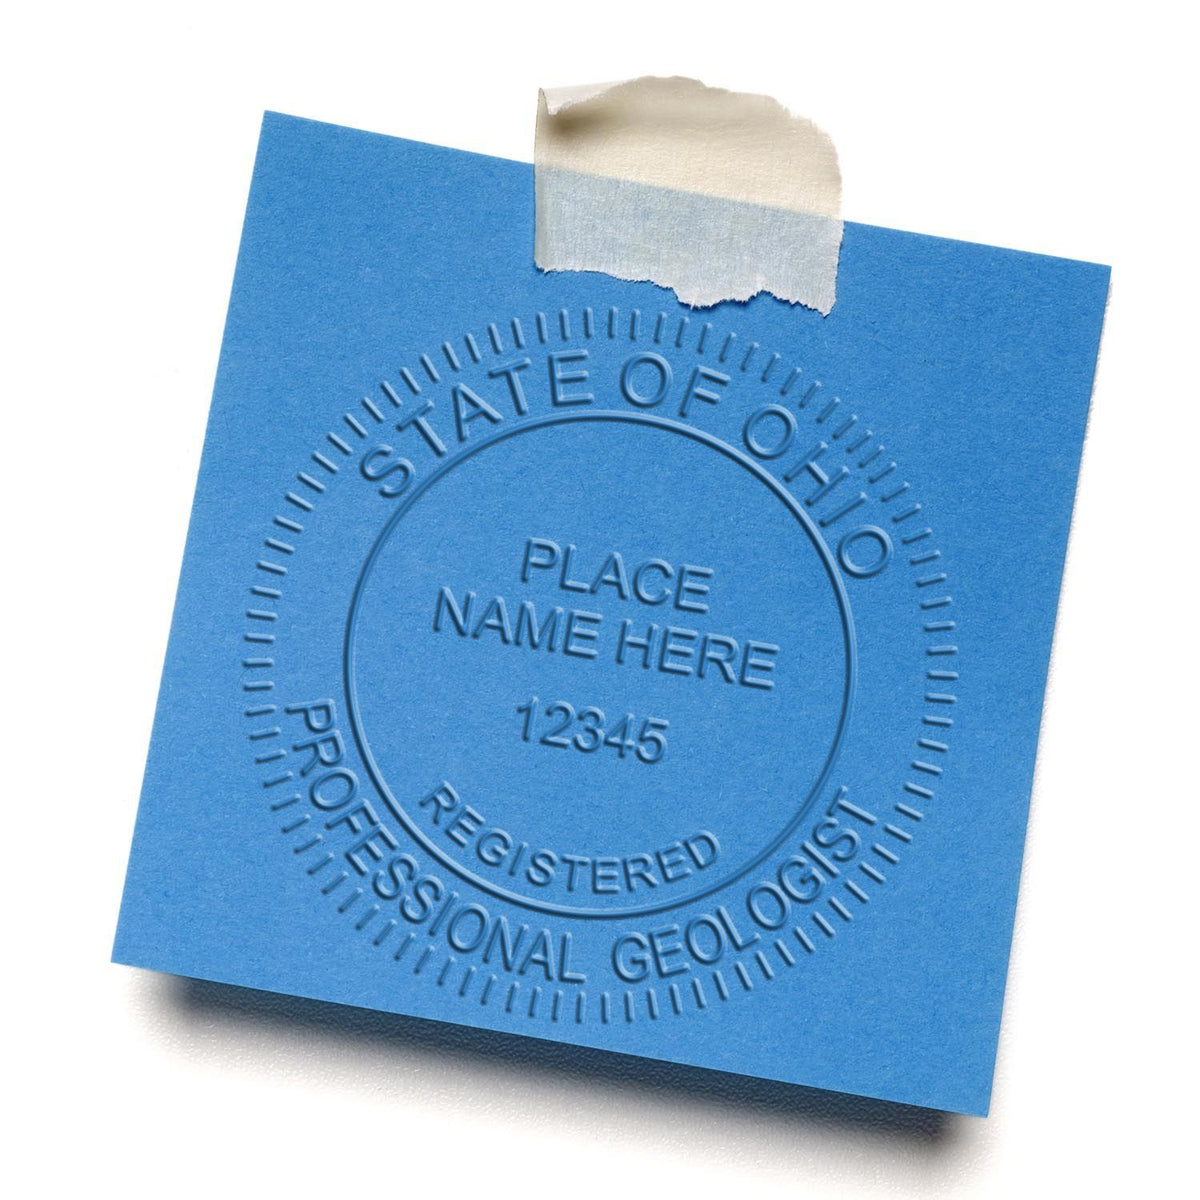 A photograph of the Gift Ohio Geologist Seal stamp impression reveals a vivid, professional image of the on paper.